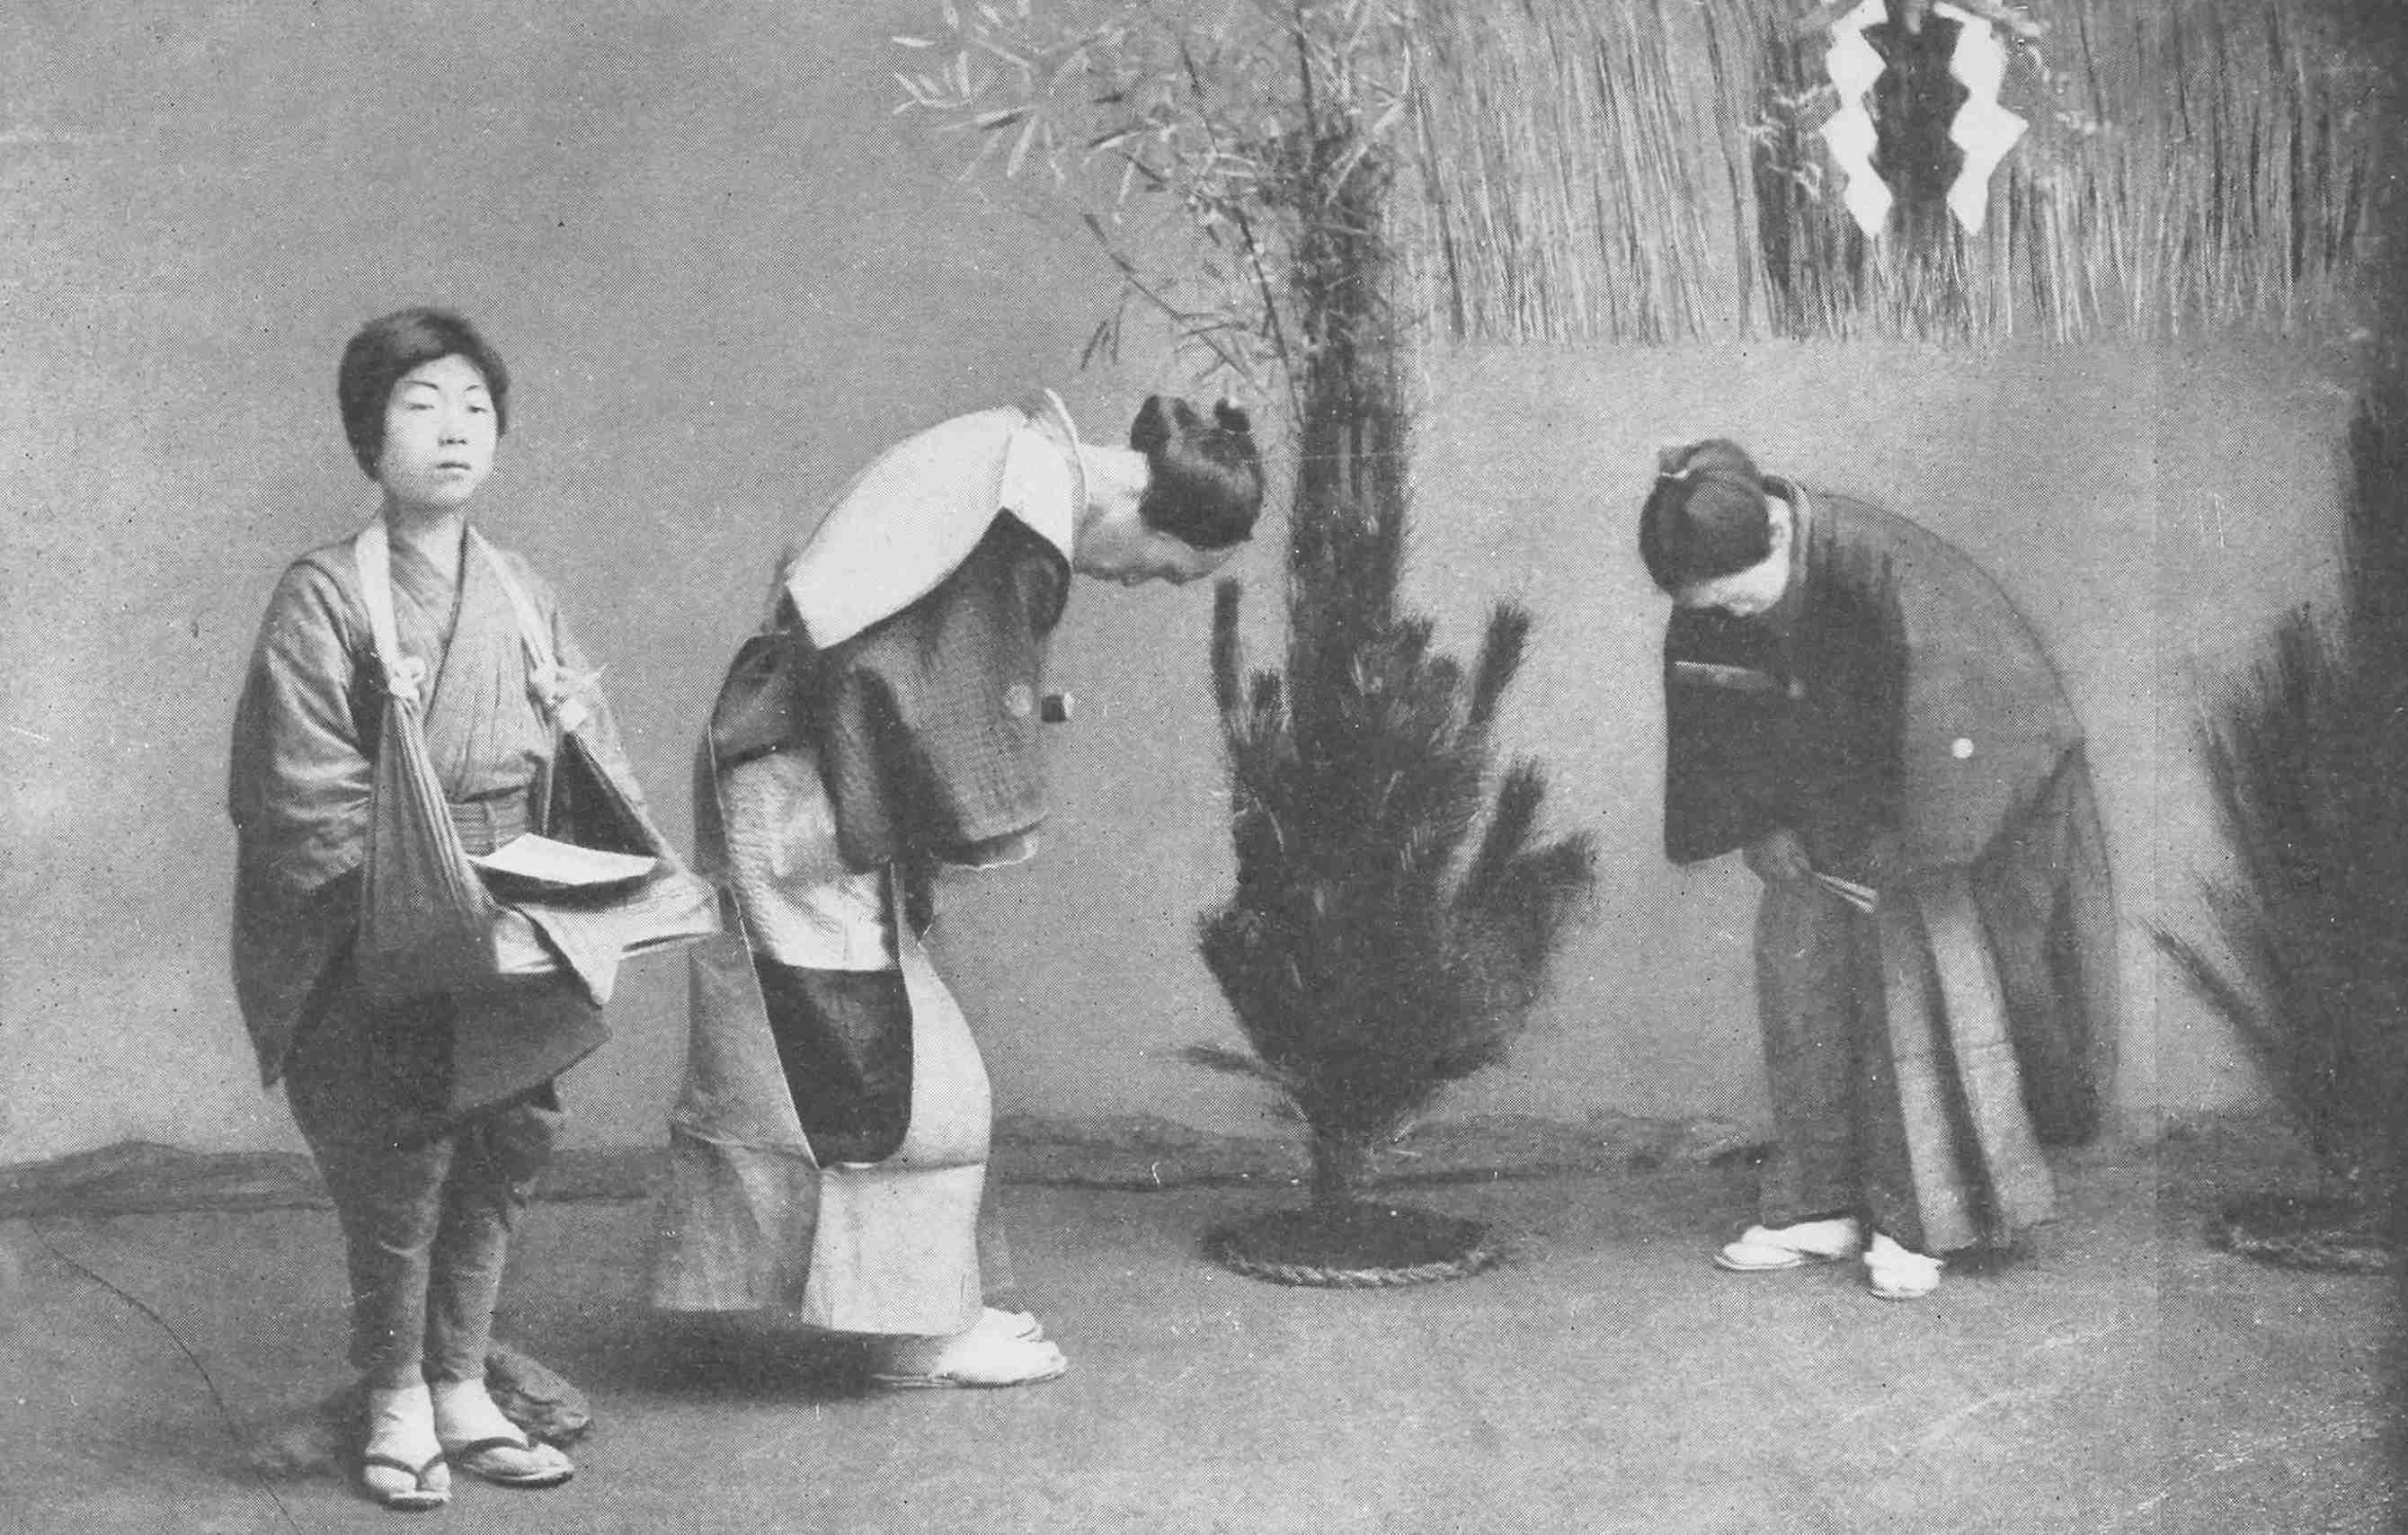 A Handbook Of Modern Japan, by Ernest W. Clement —A Project